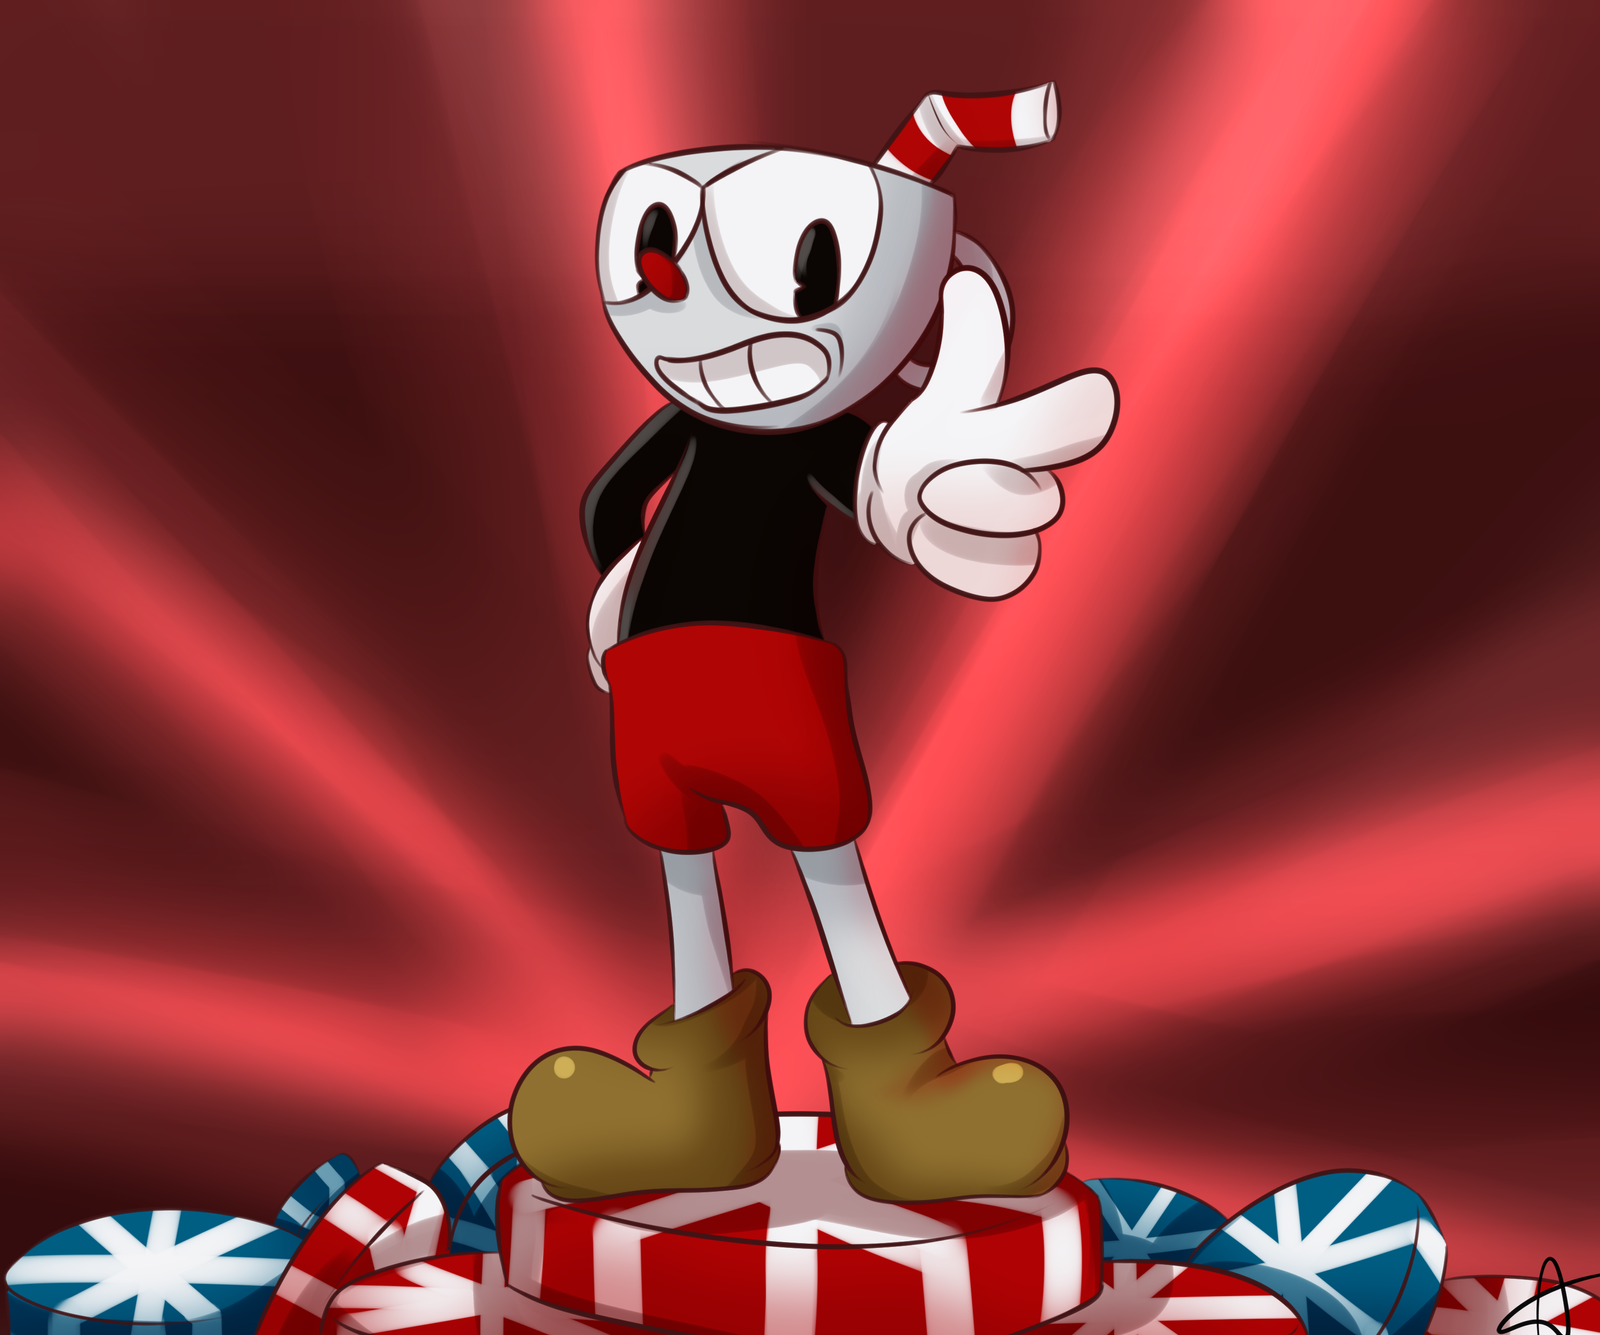 Cuphead - Don't deal with the Devil by deathZera on DeviantArt.